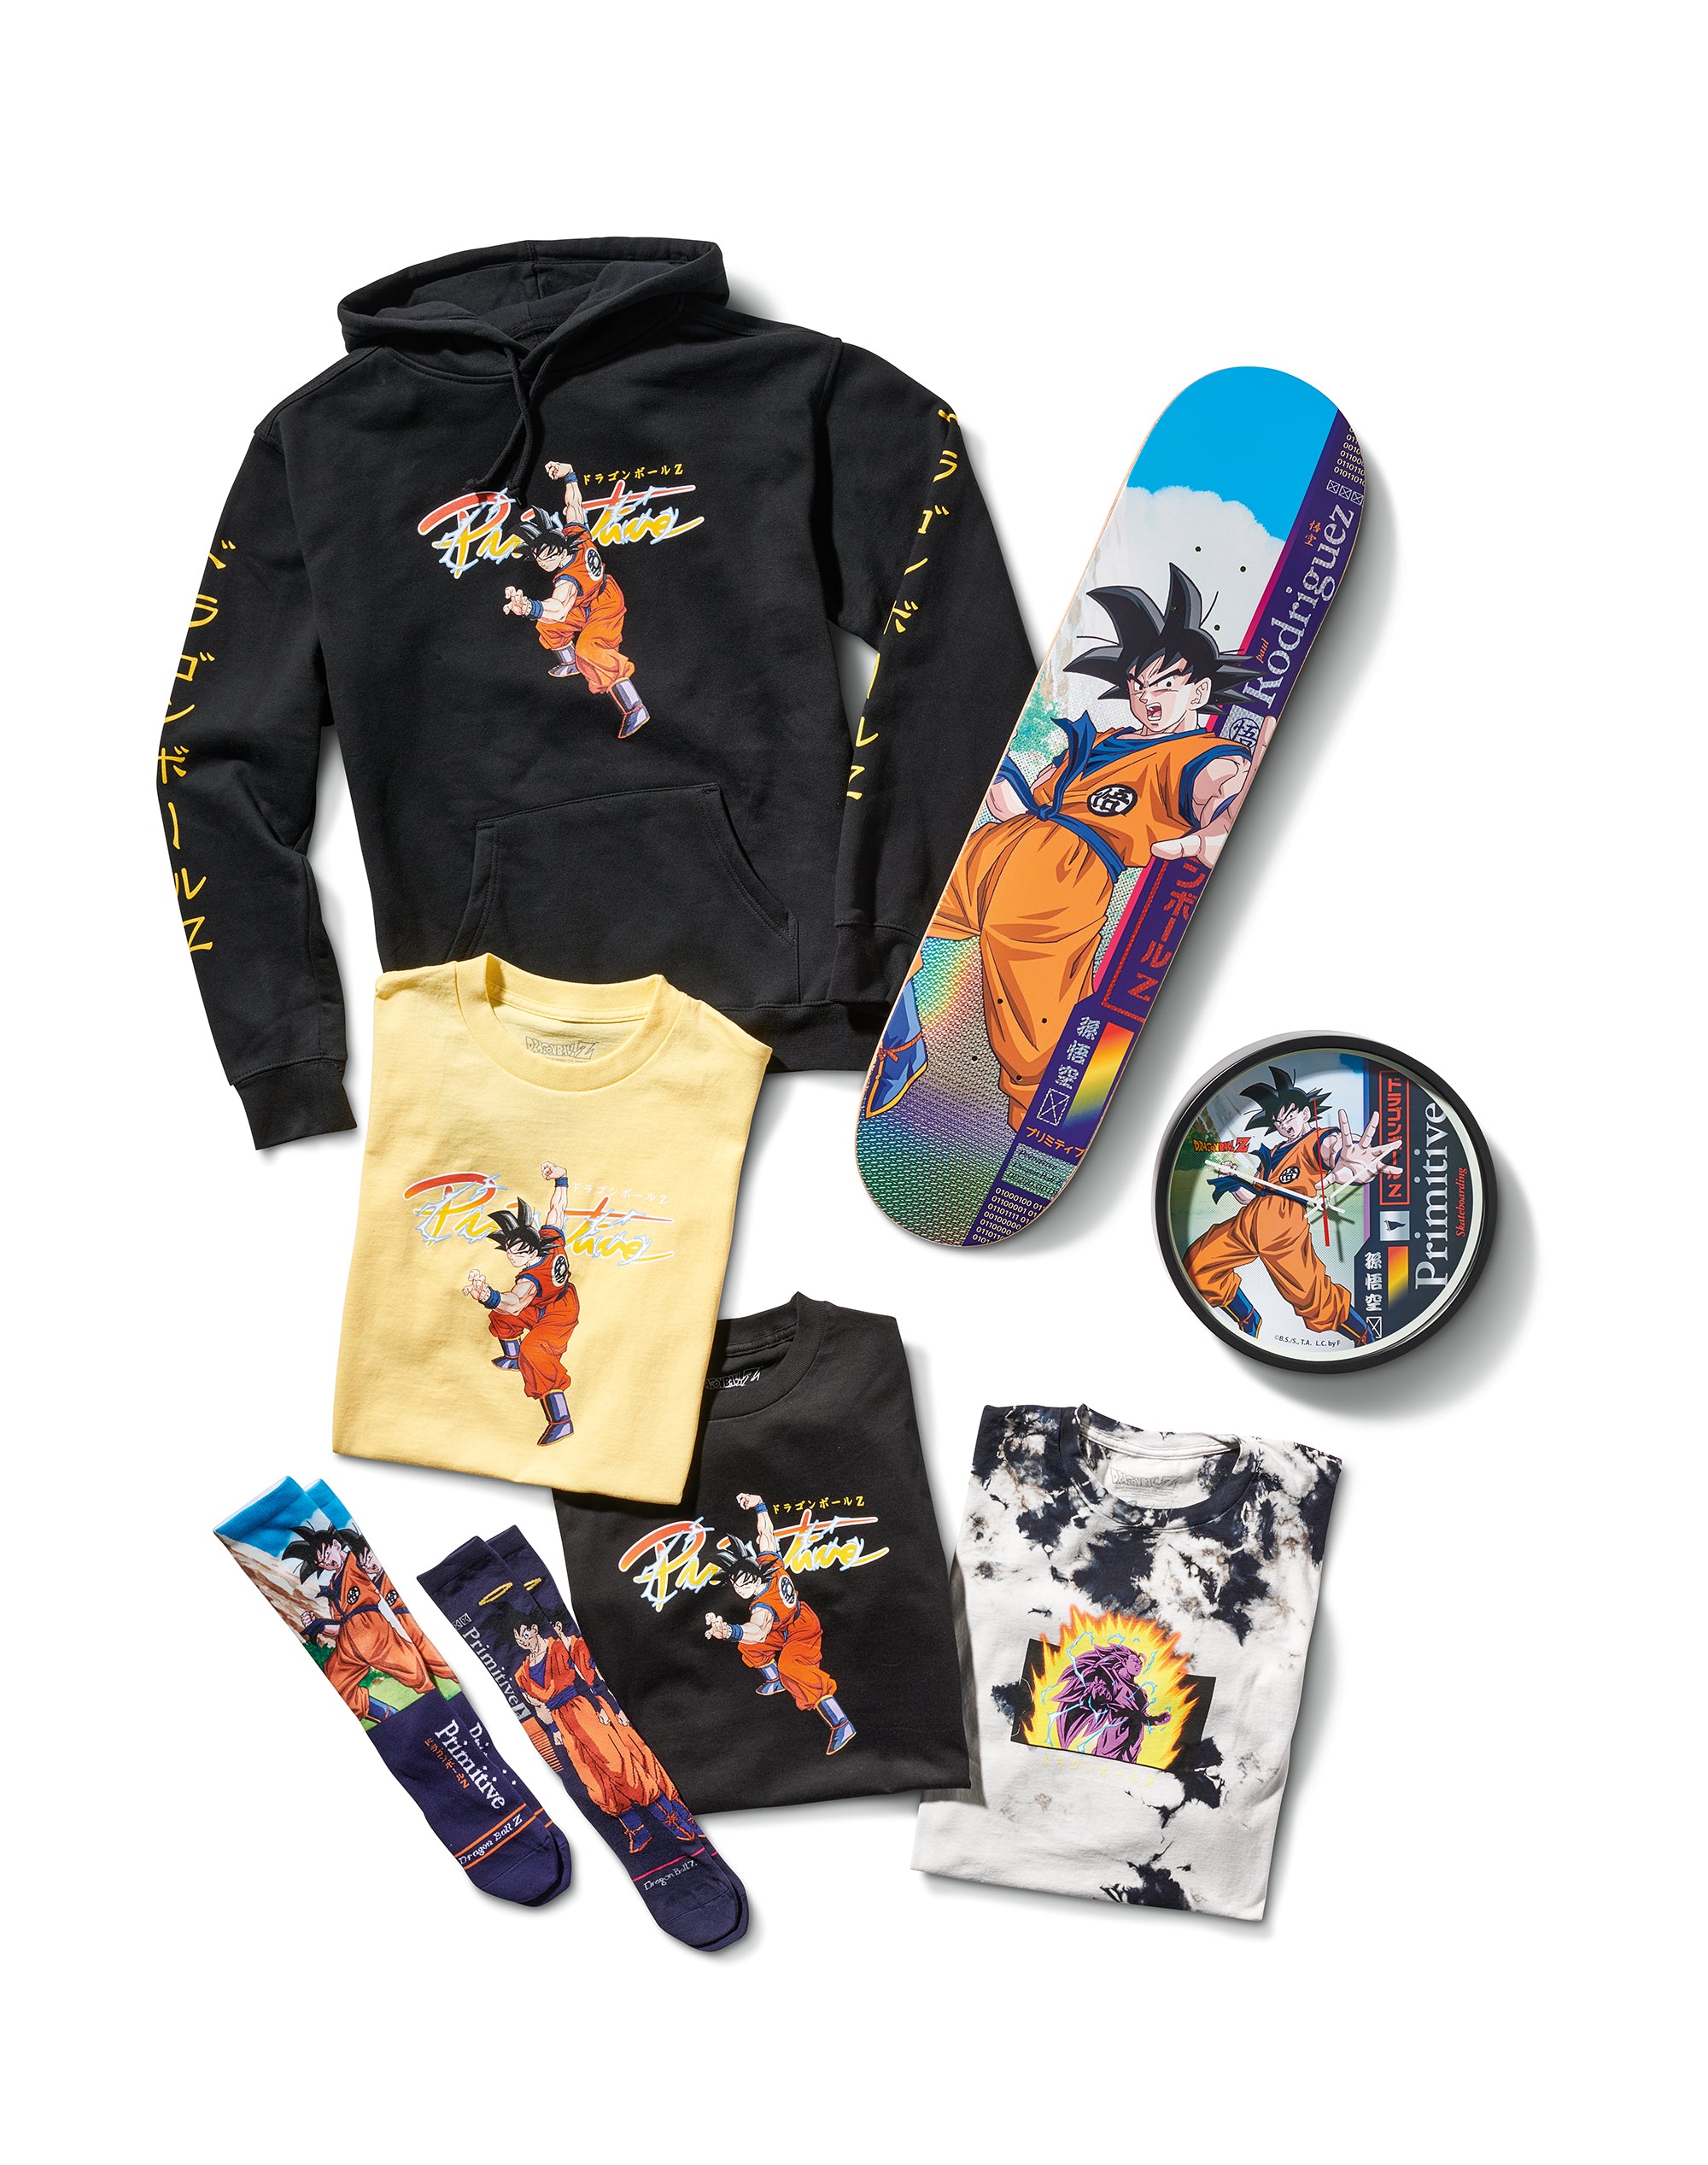 DRAGON BALL Z COLLAB AVAILABLE NOW!